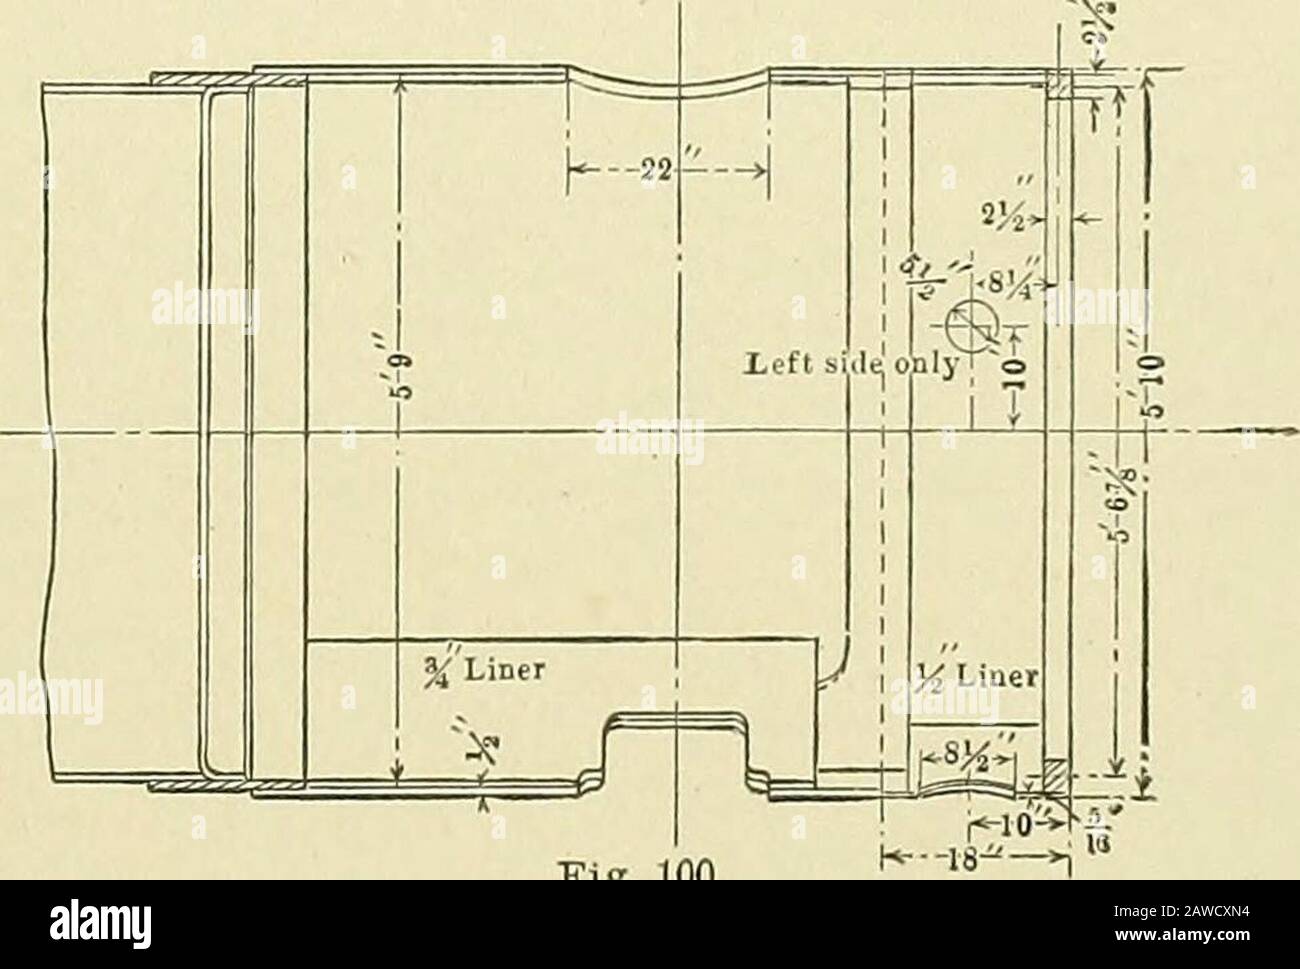 Laying out for boiler makers and sheet metal workers; a practical treatise on the layout of boilers, stacks, tanks, pipes, elbows, and miscellaneous sheet metal work . Fig. 99. Fig, 100 ^ 1 E • g •4 H C- a 0 0000000000 ooooooo( fcf°? orifpft^.-fipofofff 0 -fci g^i ^^ T s ] H 1 i ! Stock Photo